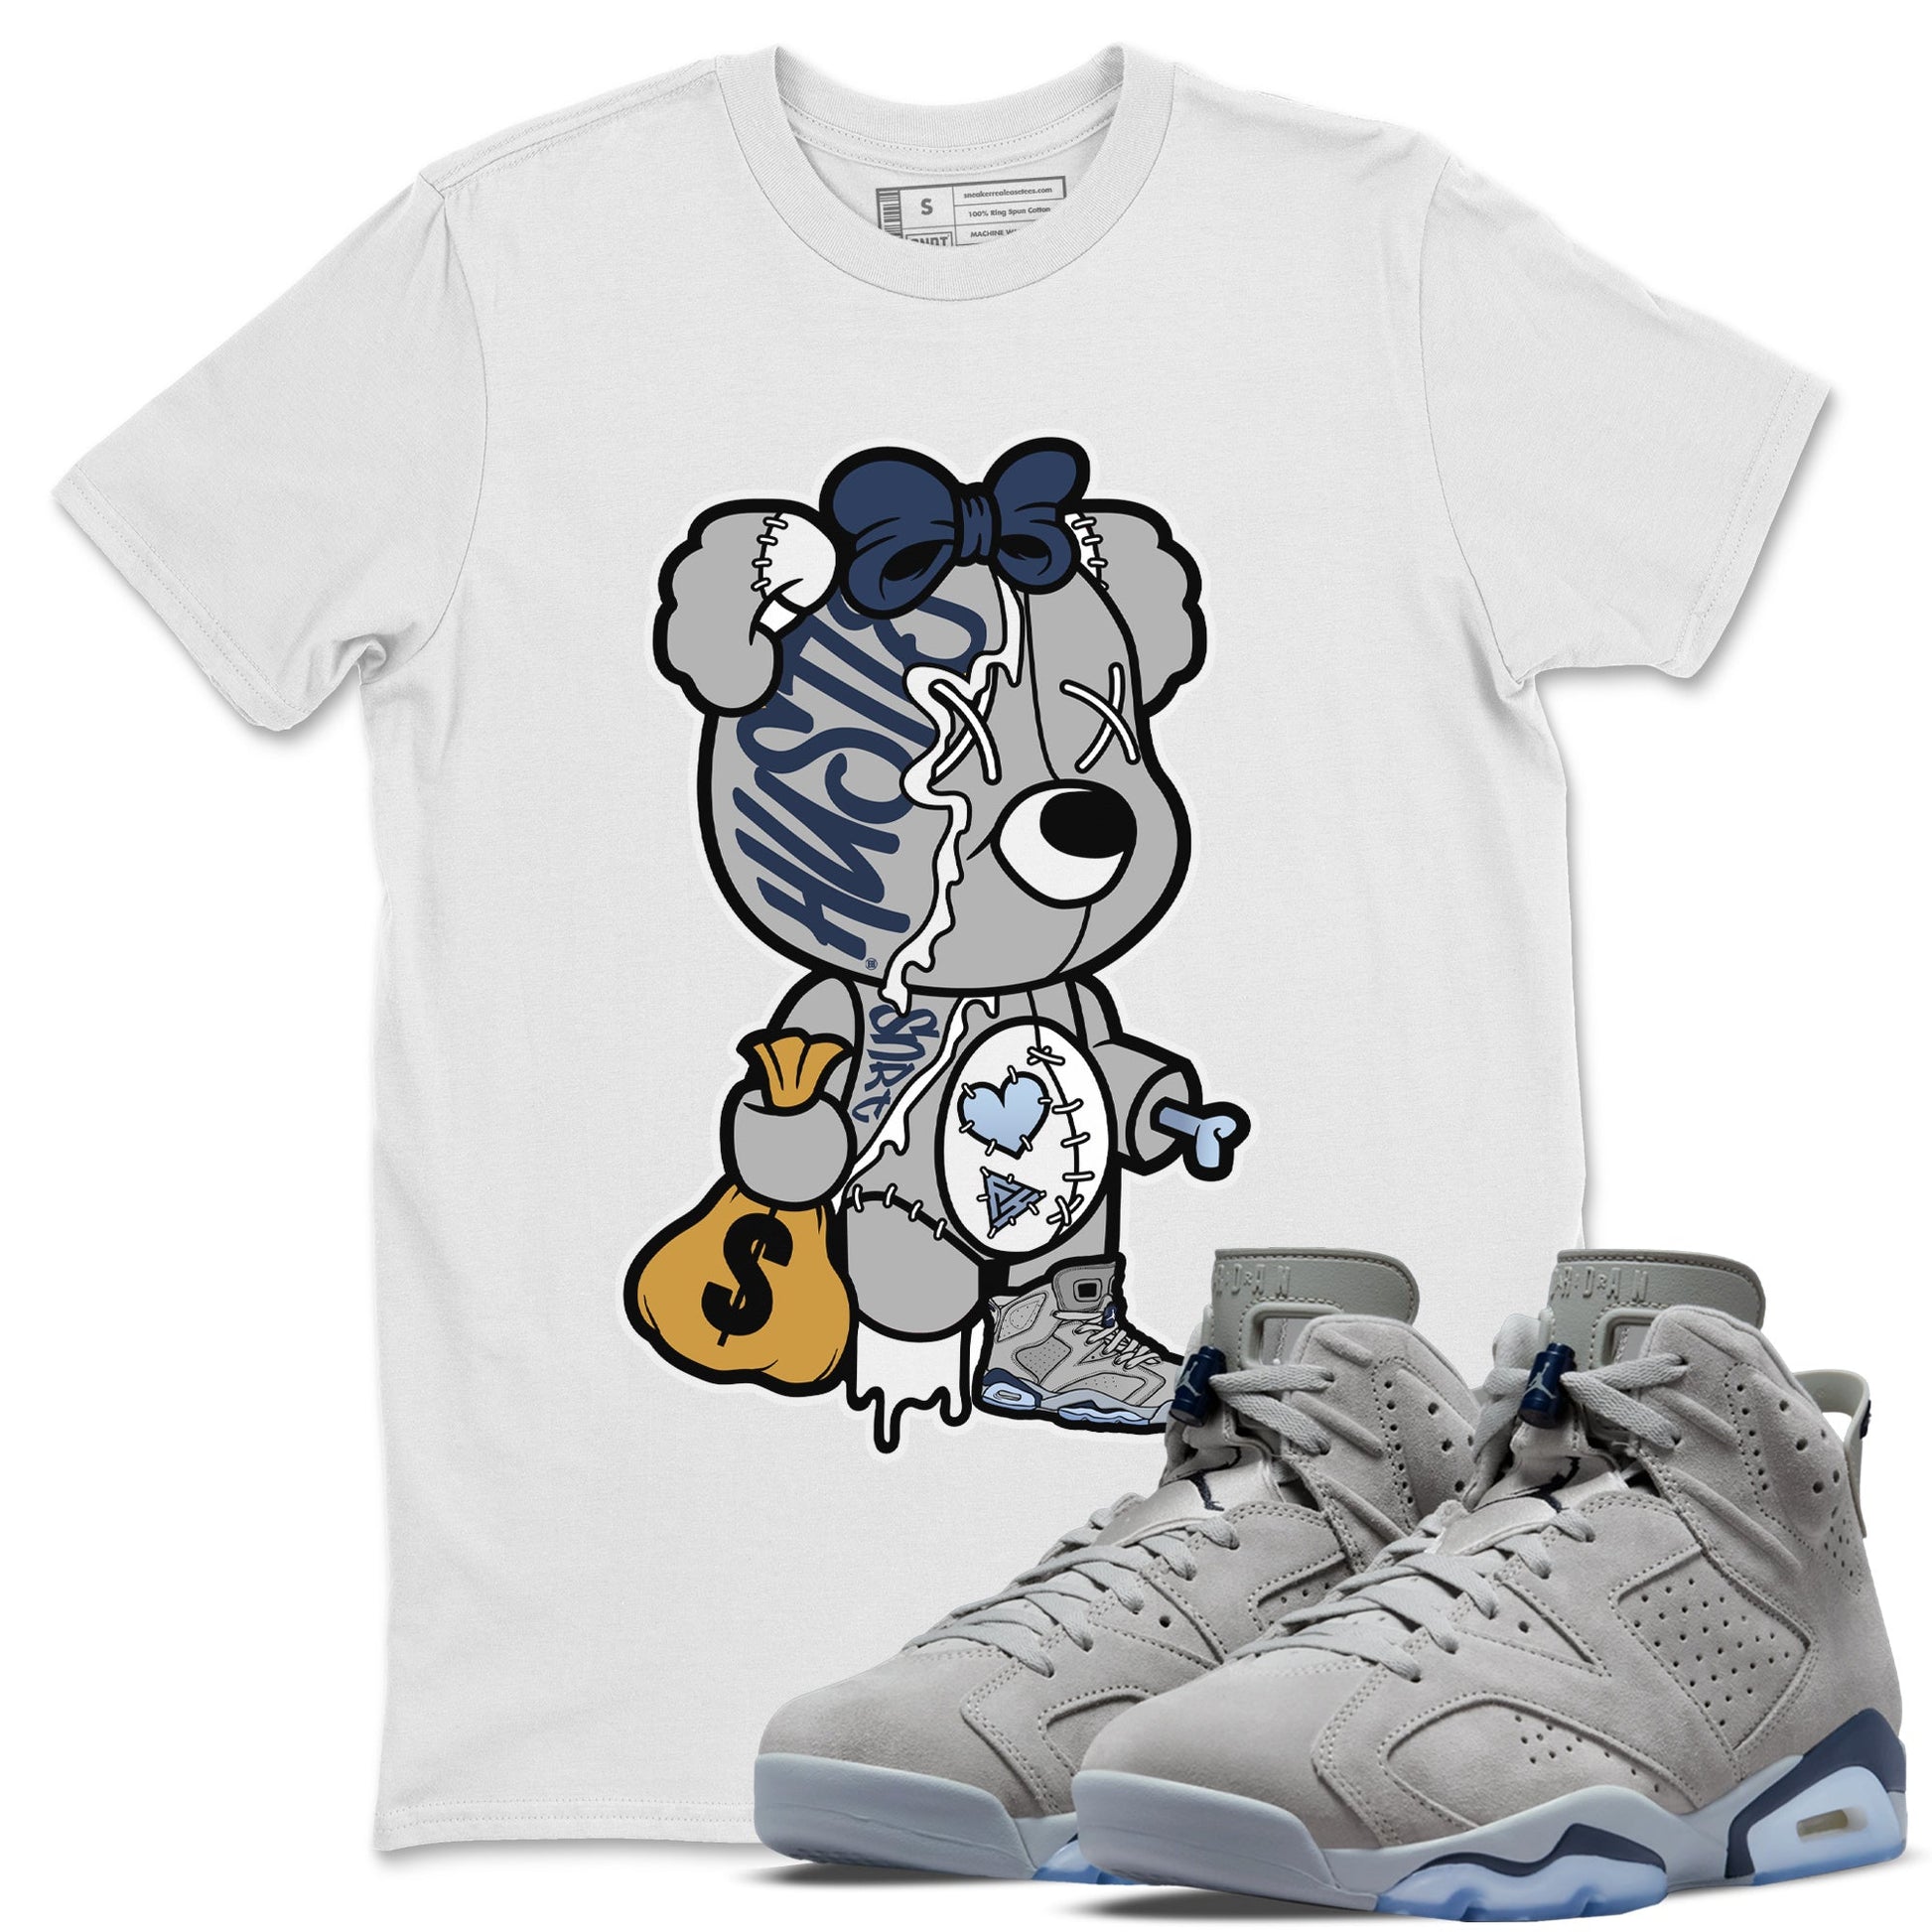 Jordan 6 Georgetown Sneaker Match Tees Stitched Hustle Bear Sneaker Tees Jordan 6 Georgetown Sneaker Release Tees Unisex Shirts